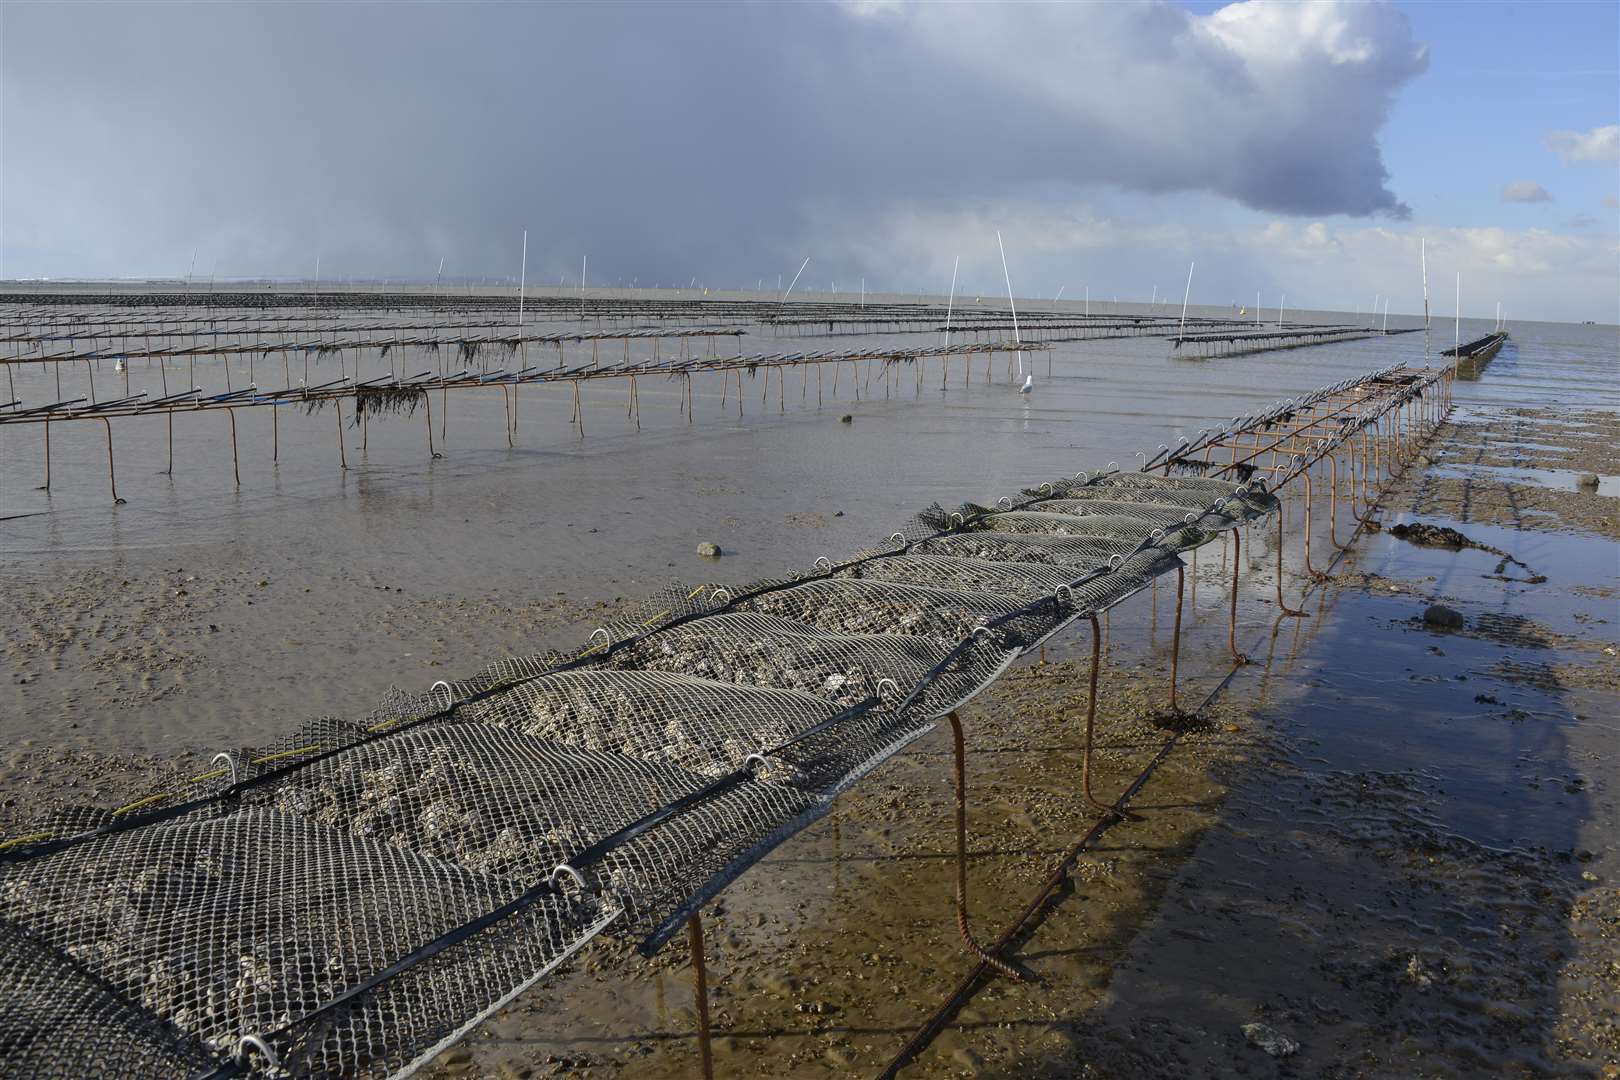 Oyster racks on Whitstable beach, exposed at low tide